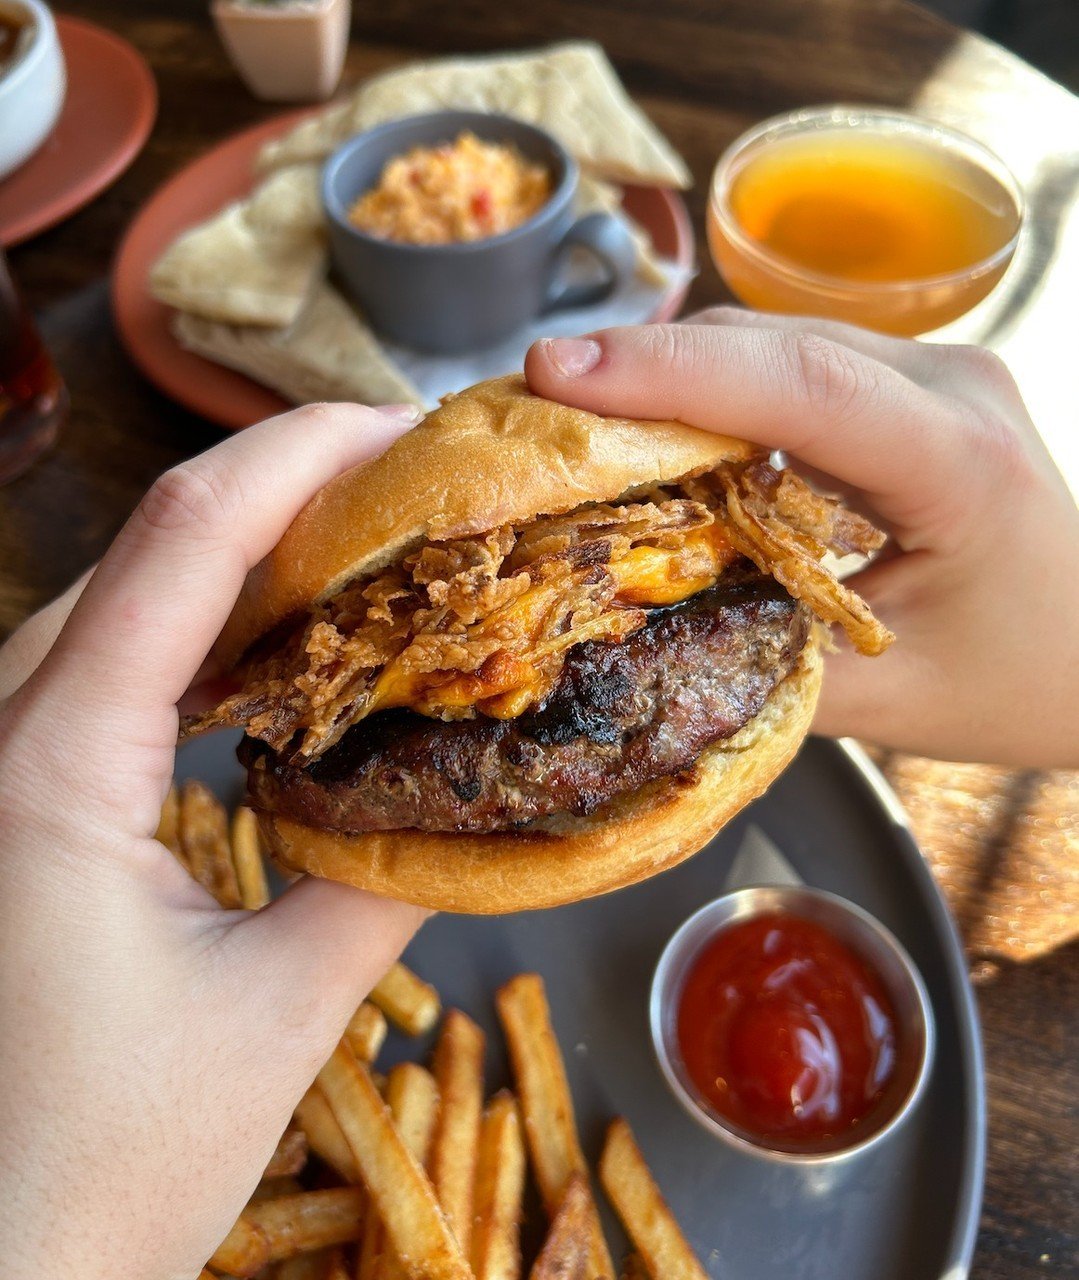 When that burger craving hits, go for the Bandit Burger!

We start with a four-meat blended patty and top it with pimento cheese and crispy fried onions. Served on a toasted challah bun for total perfection. 

We open at 11am today, join us for lunch